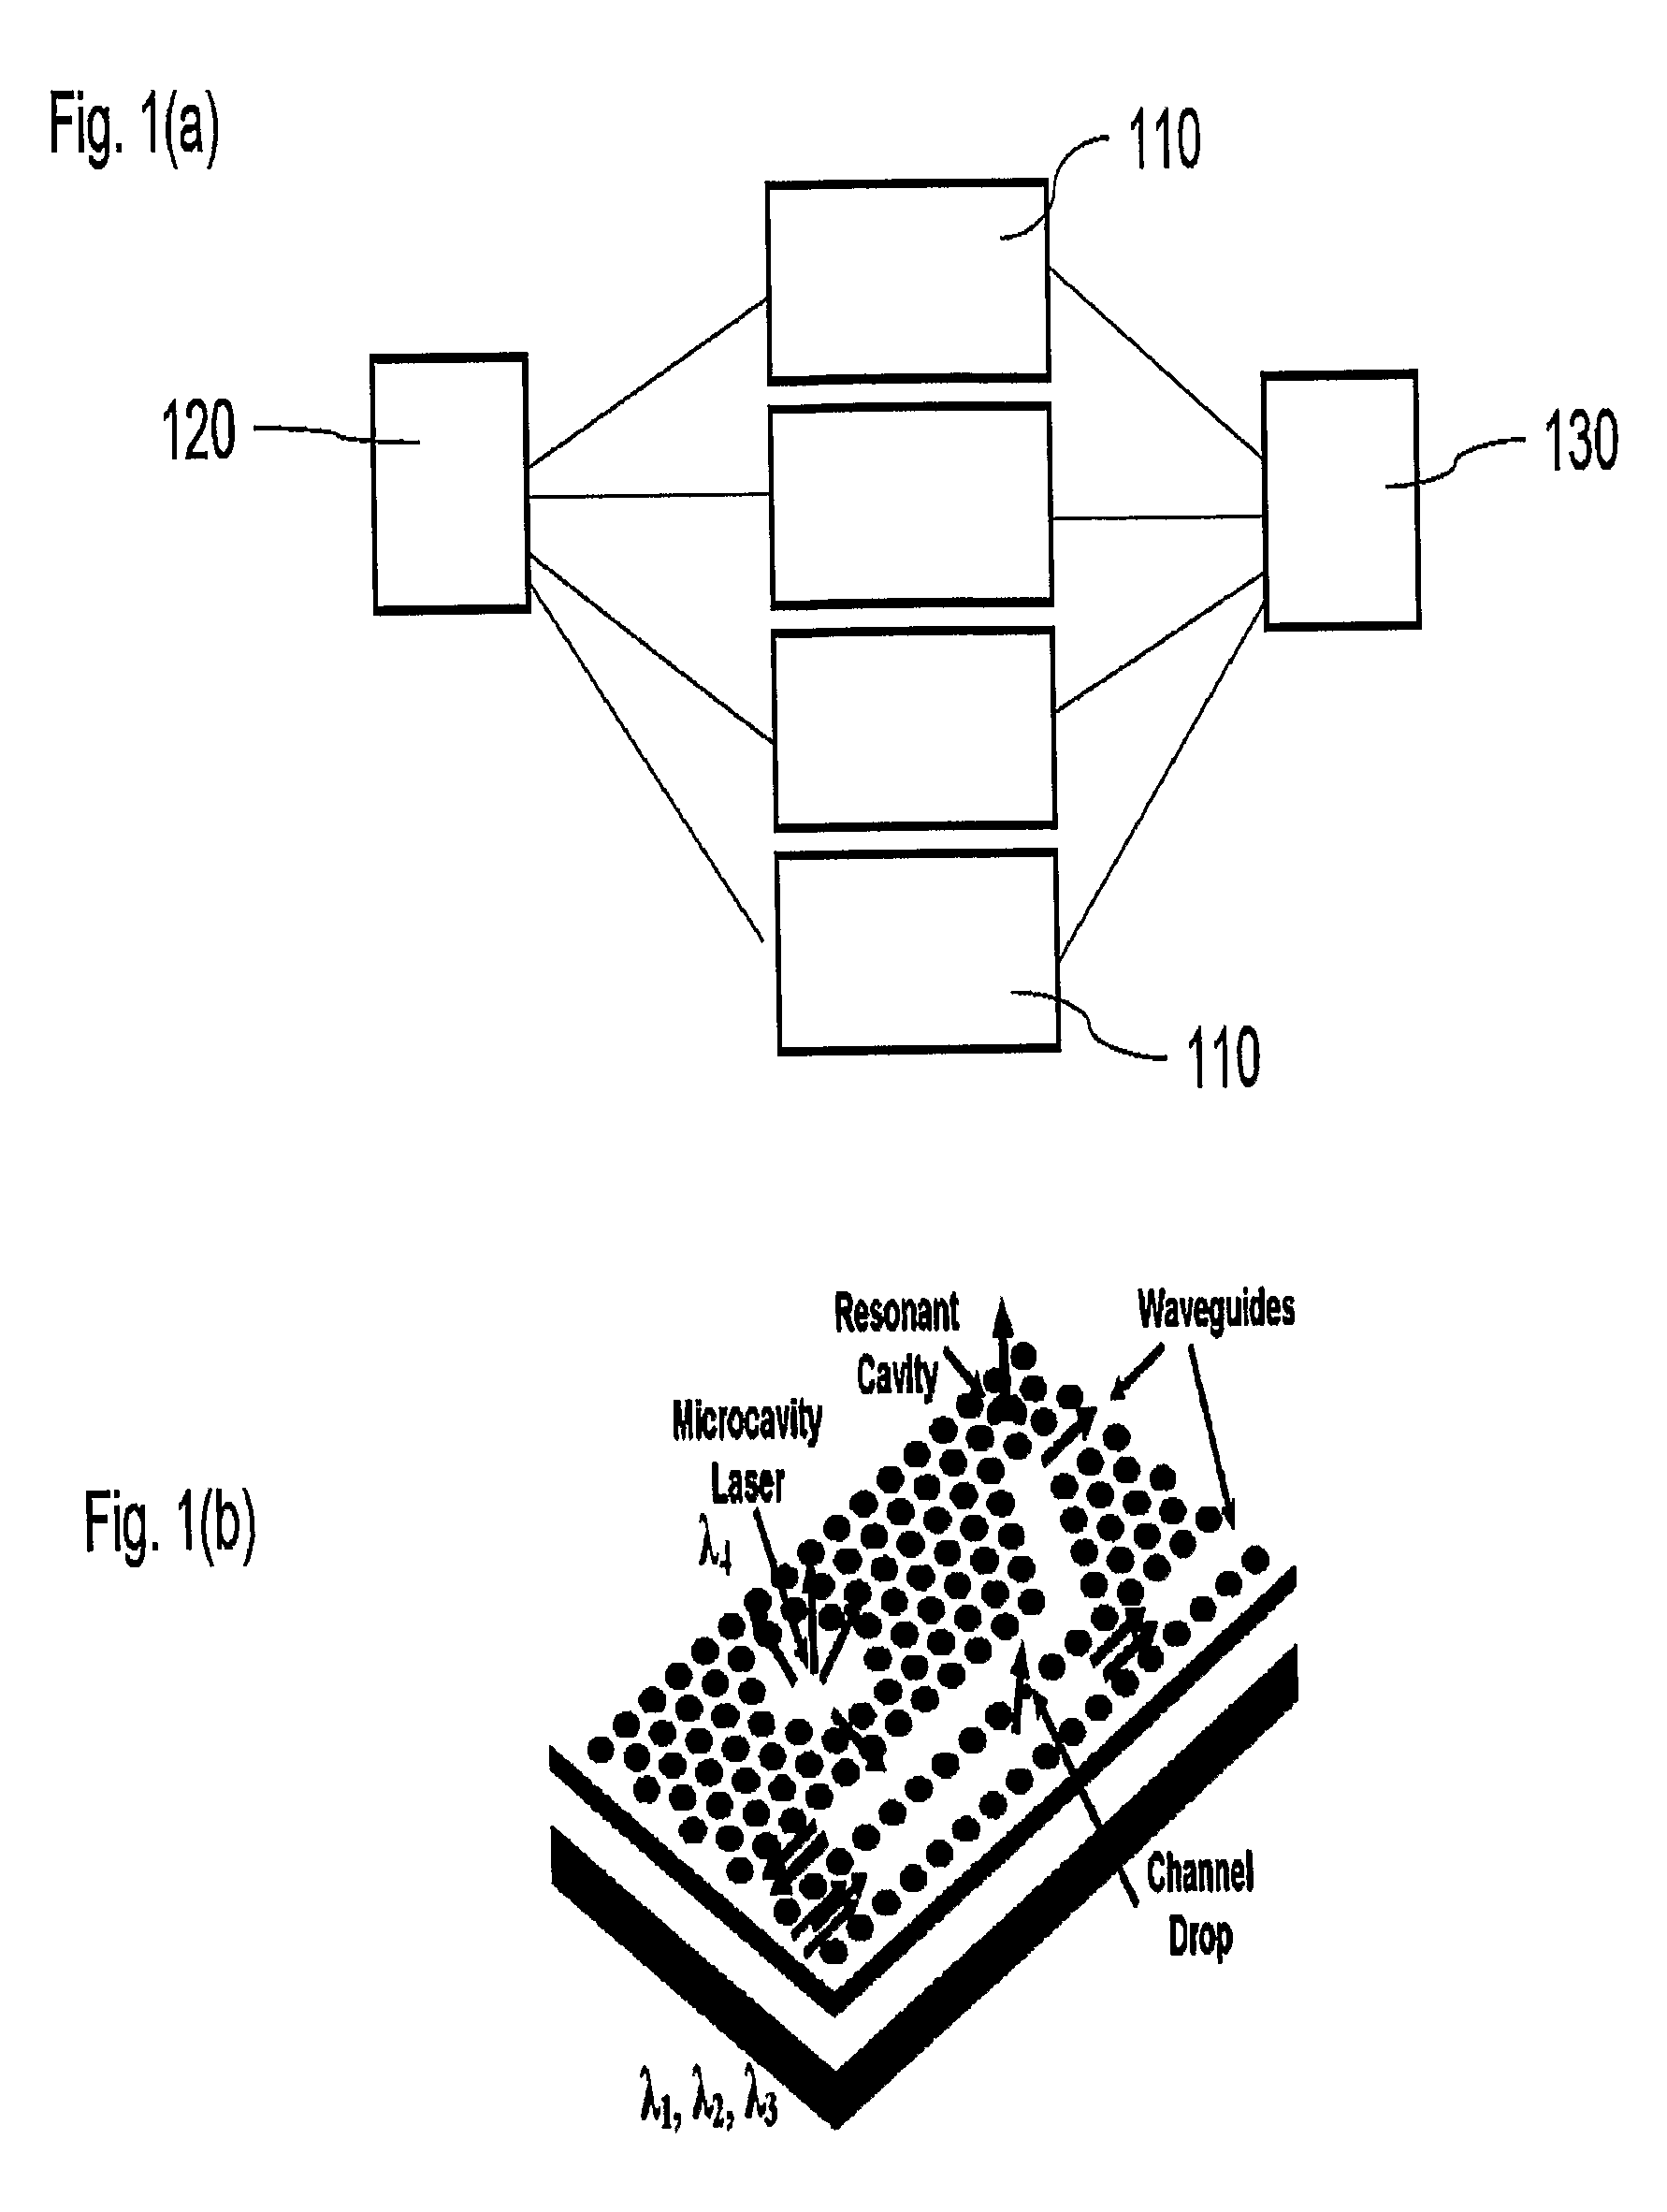 Methods, materials and devices for light manipulation with oriented molecular assemblies in micronscale photonic circuit elements with high-q or slow light